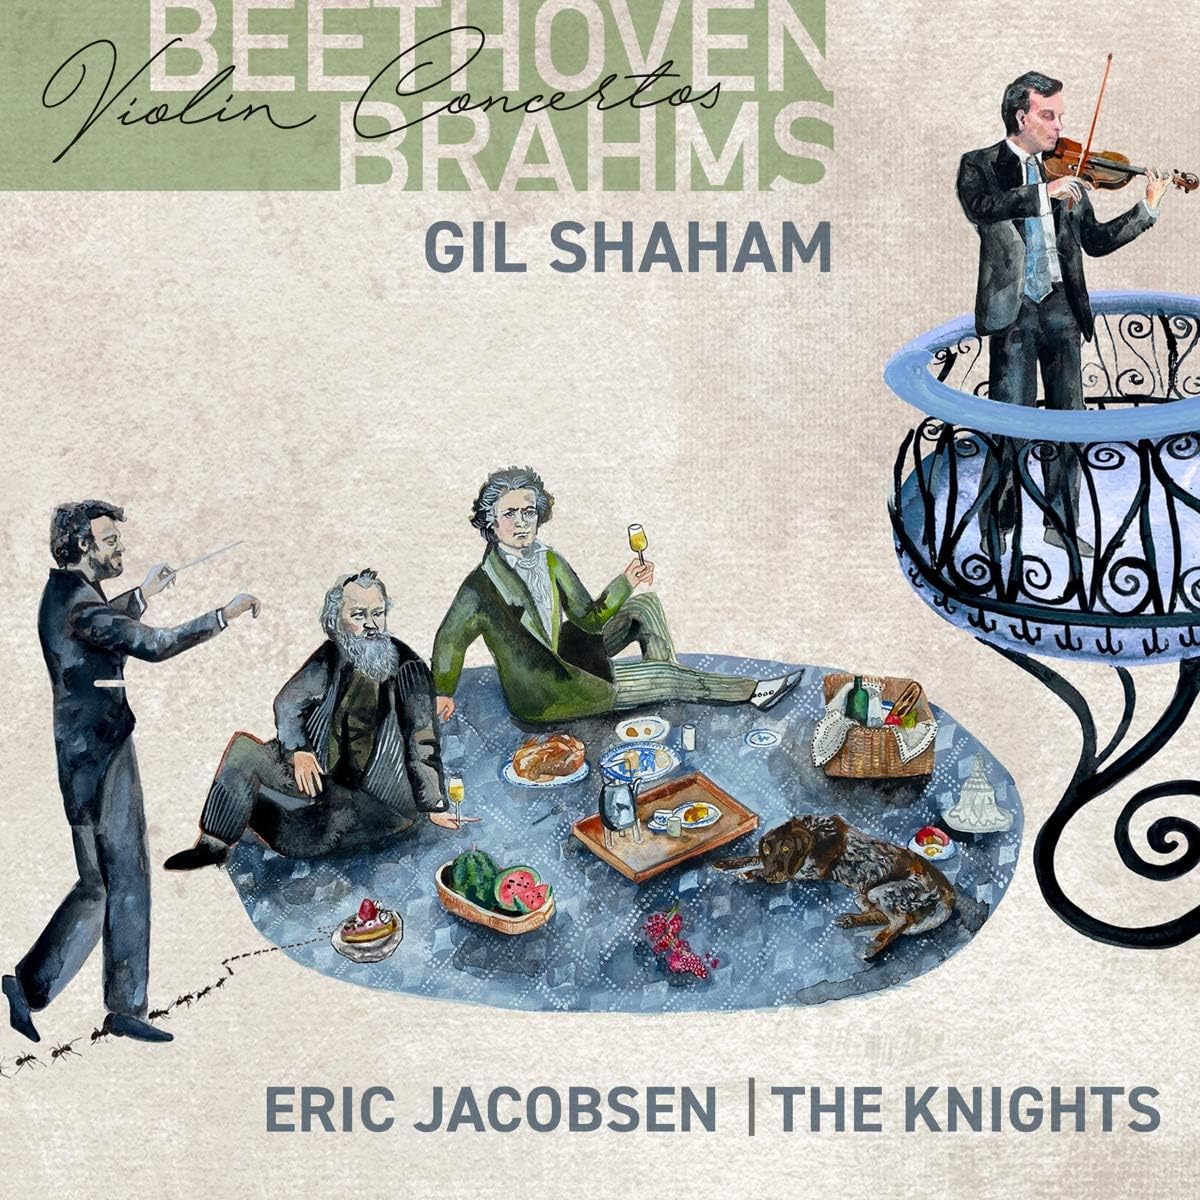 Beethoven, Brahms: Violin Concertos | Gil Shaham, Eric Jacobsen, The Knights